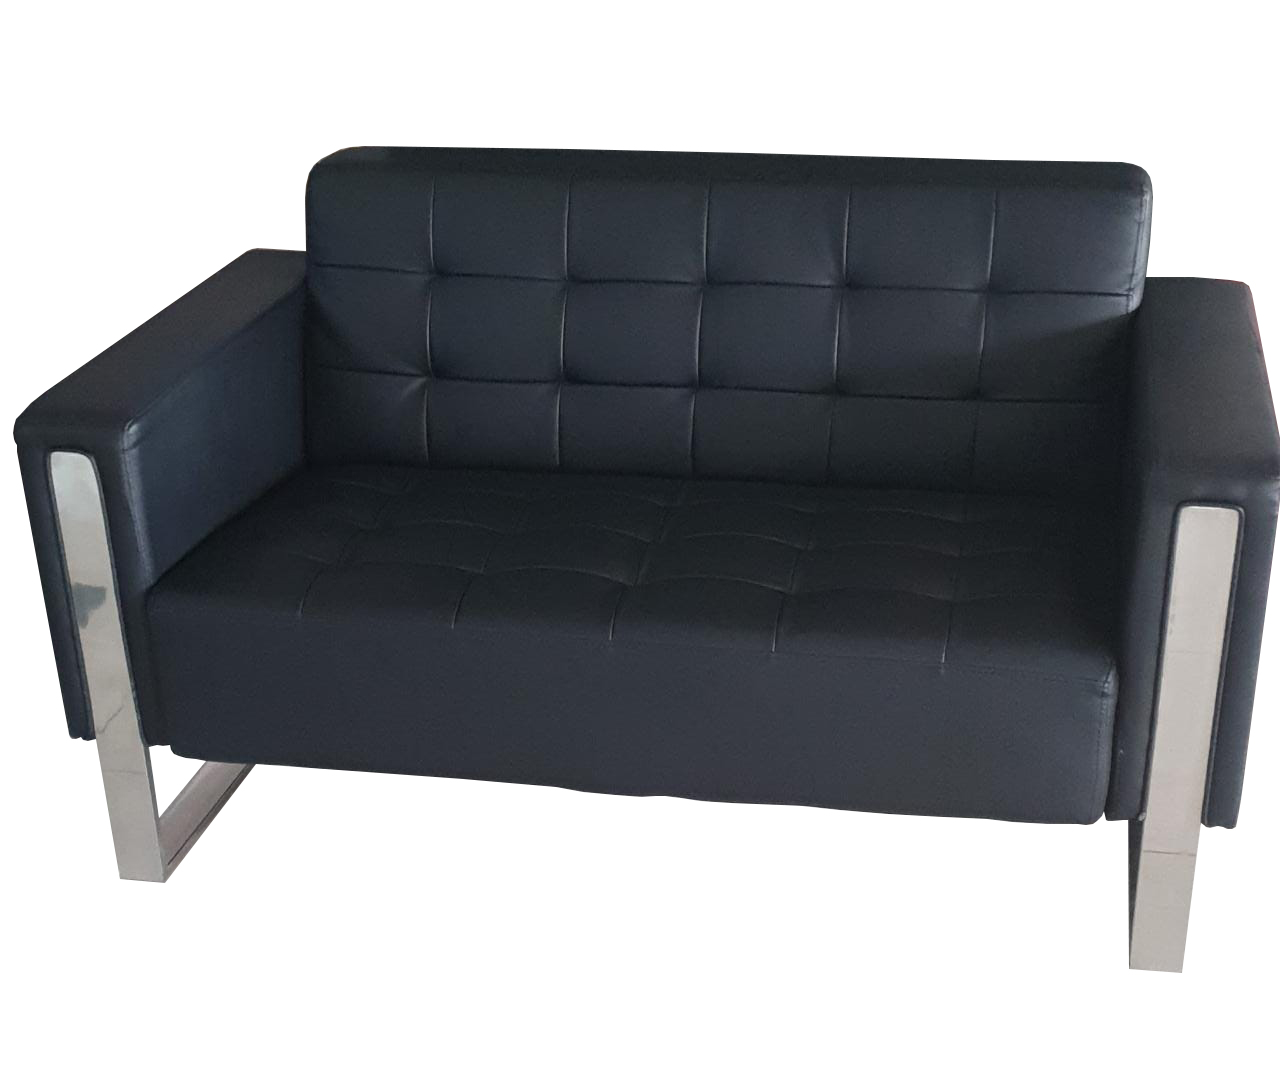 Sofa Leather With Chrom 2 Seater Black Color  